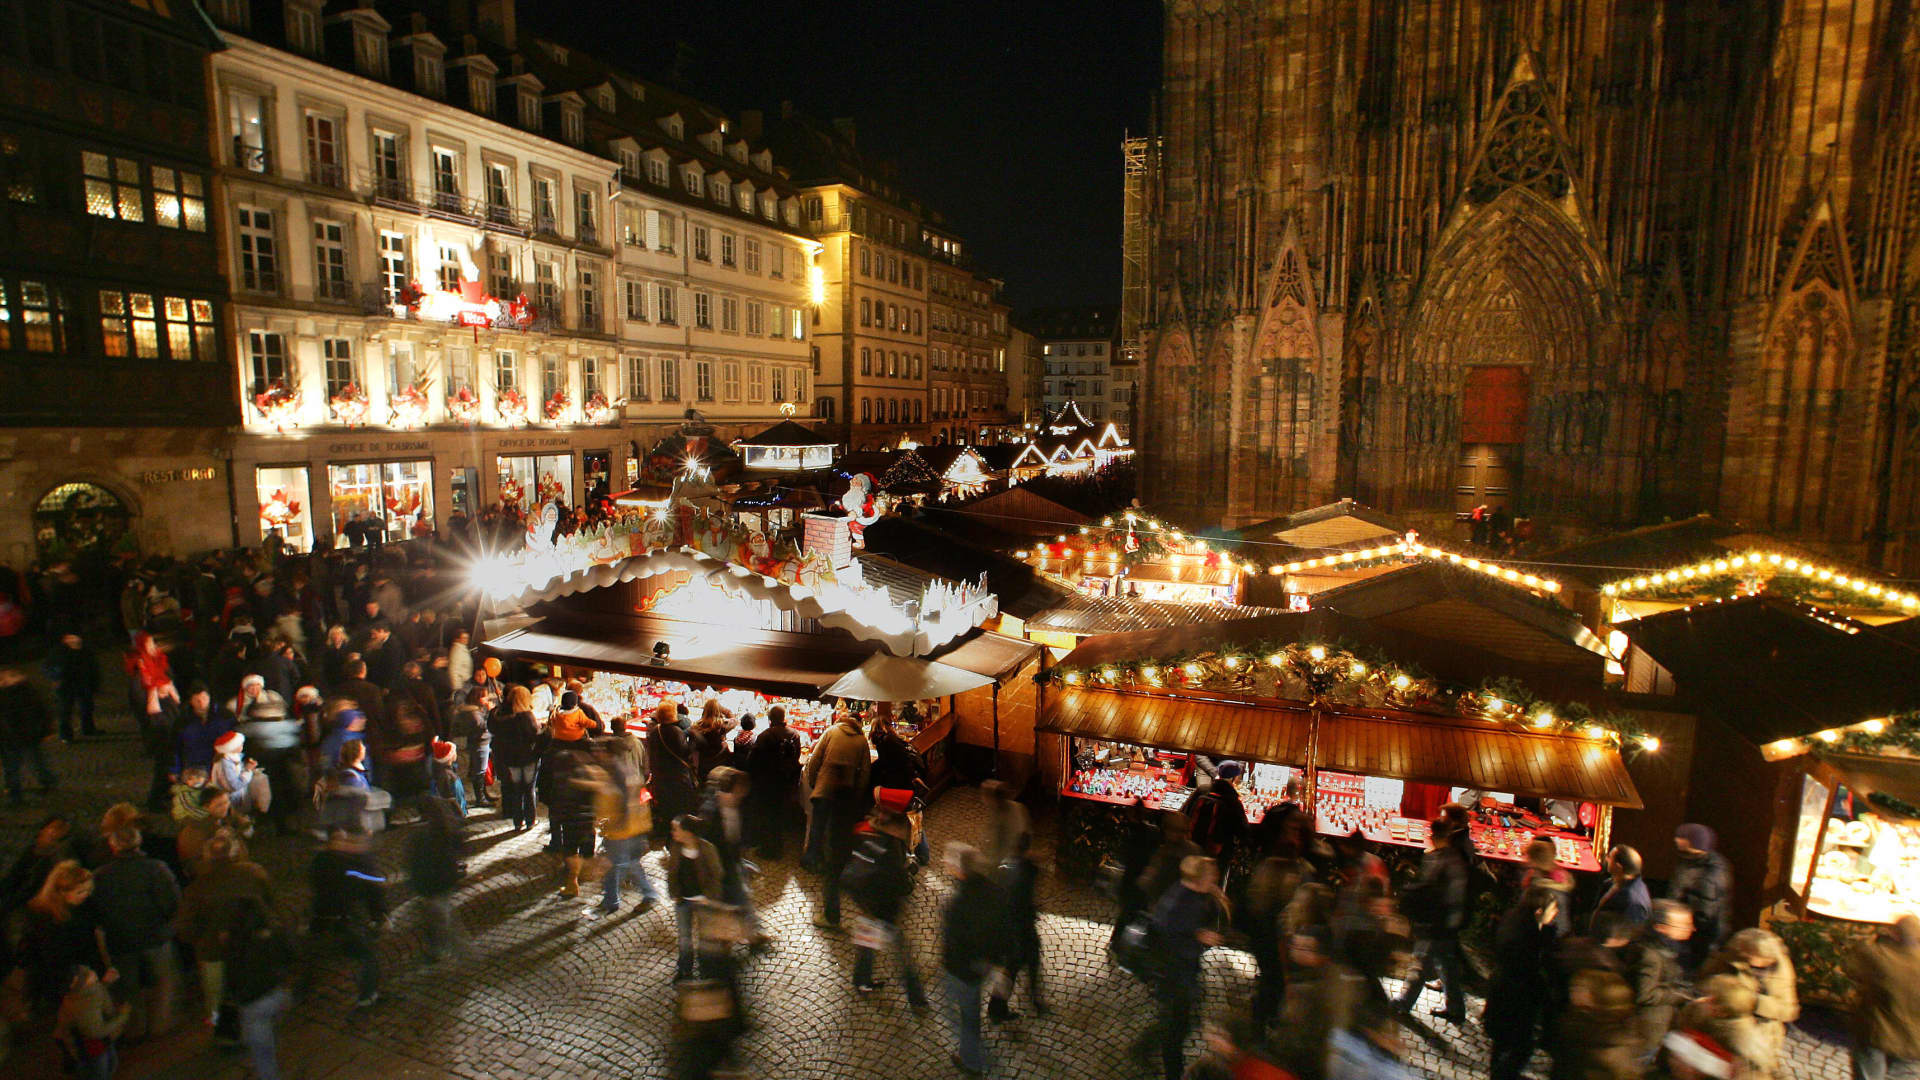 The Strasbourg Christmas market, the oldest Christmas market in France, attracts thousands of visitors each year.